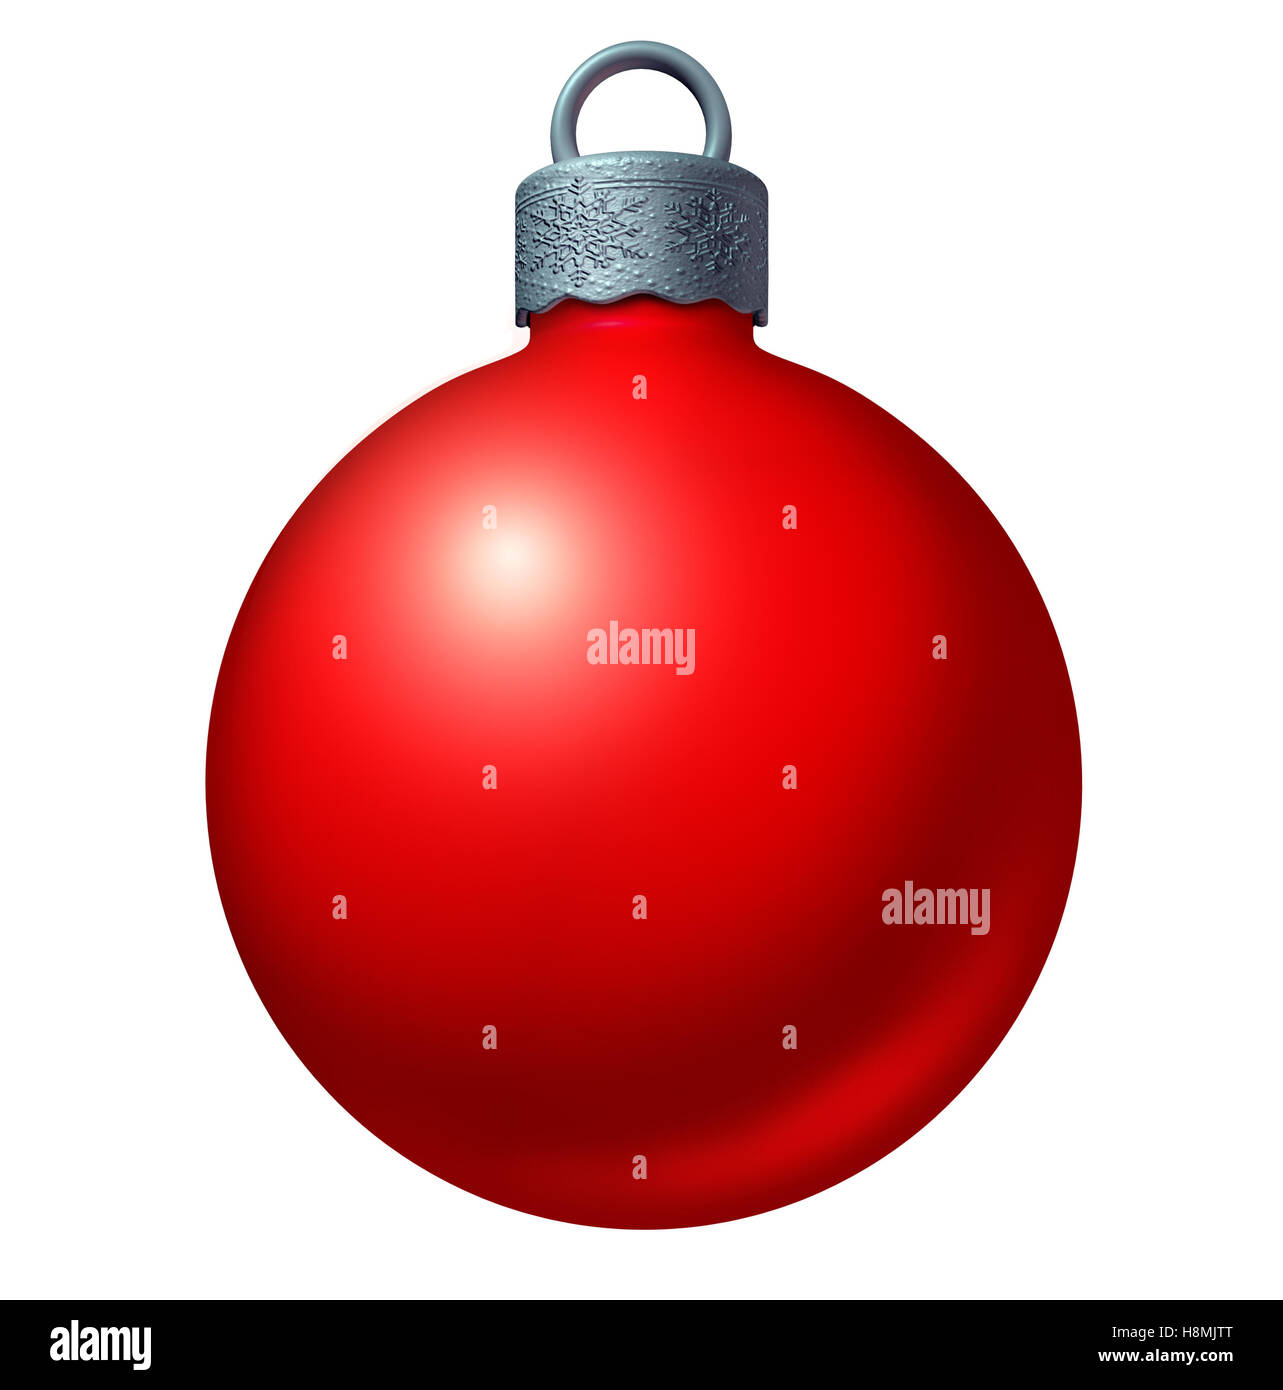 Christmas ball ornament as a red winter holiday sphere decoration as a seasonal ornamental design element isolated on a white background as a 3D illustration. Stock Photo